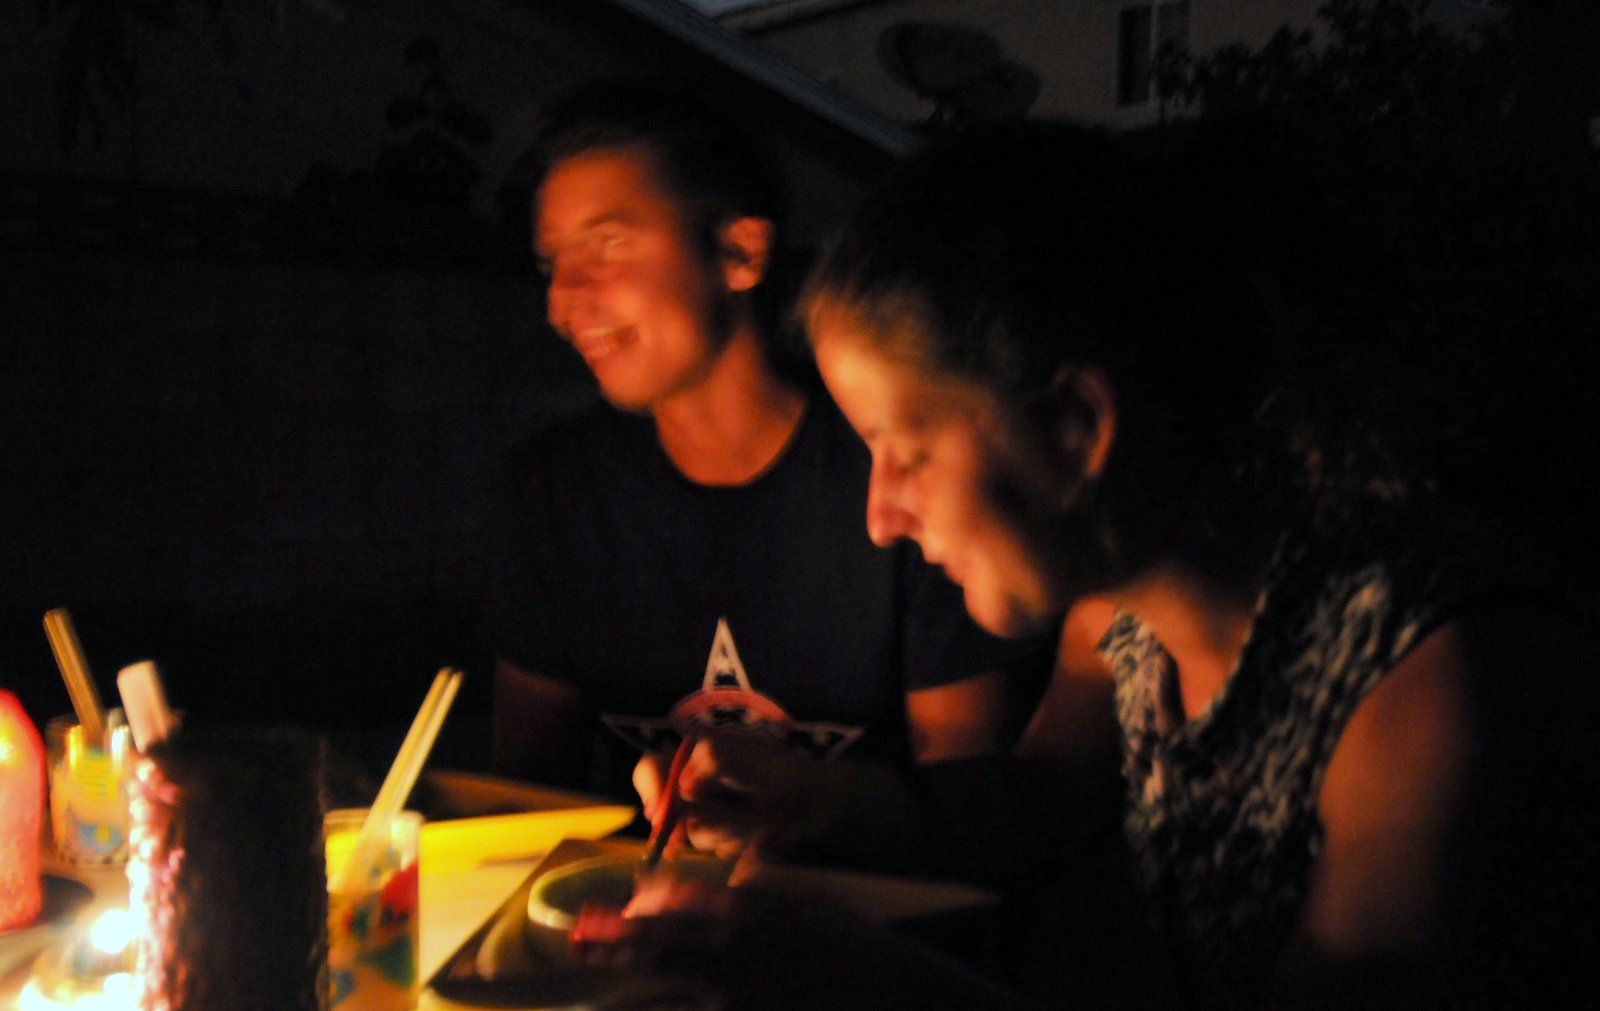 Akos & Eszter eat dessert in the backyard. Available-light photo illuminated by candles